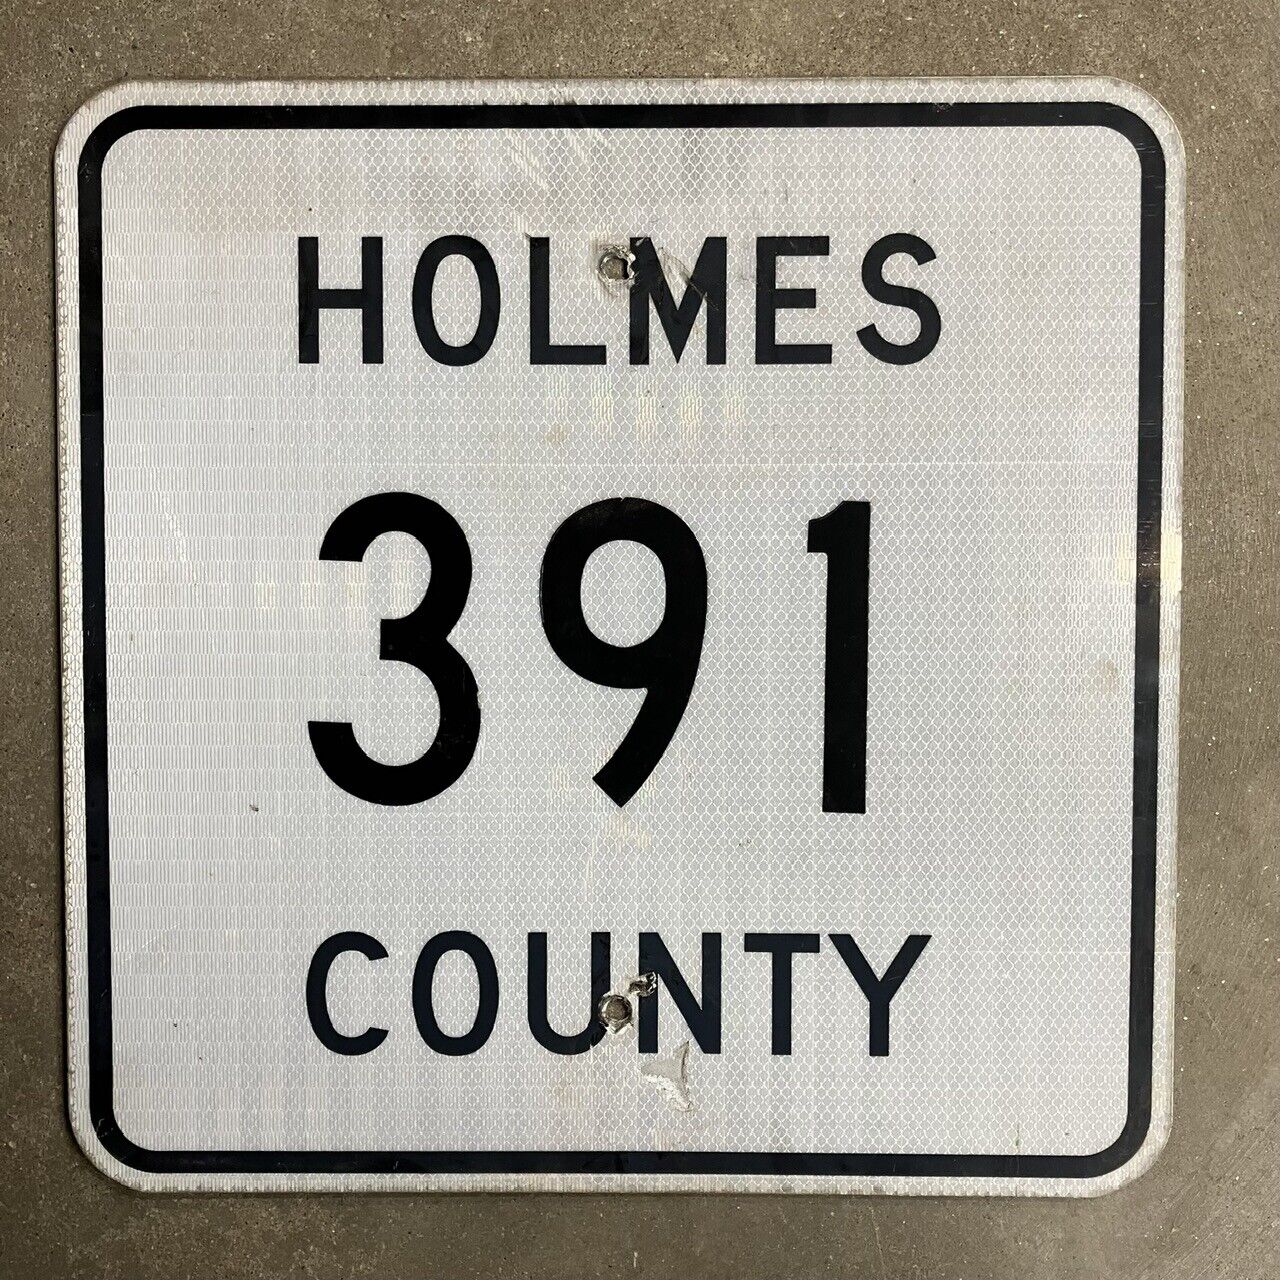 Ohio Holmes County highway 391 route marker road sign 18x18 1980s S570